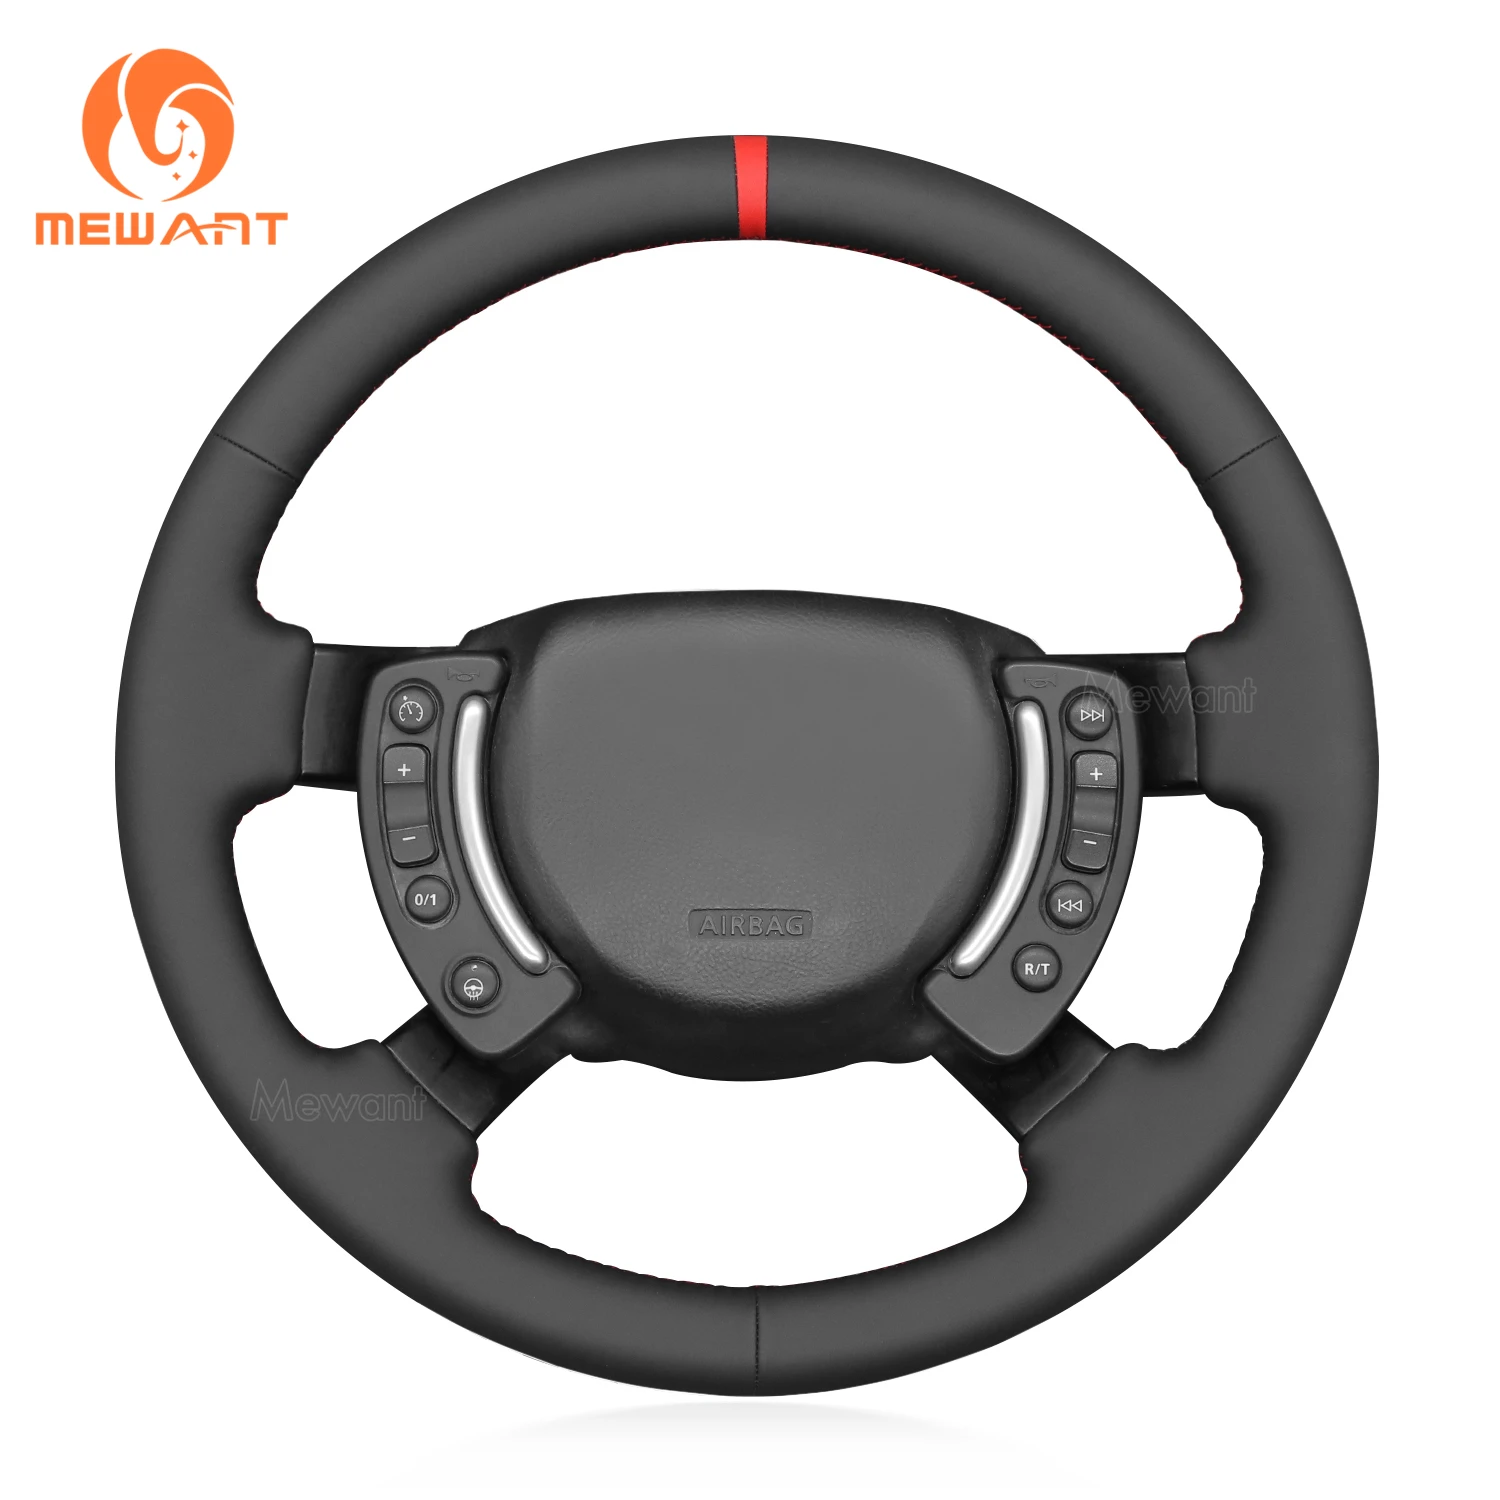 

MEWANT Black Genuine Leather Car Steering Wheel Cover for Land Rover Range Rover III(L322) Range Rover Vogue III(L322)